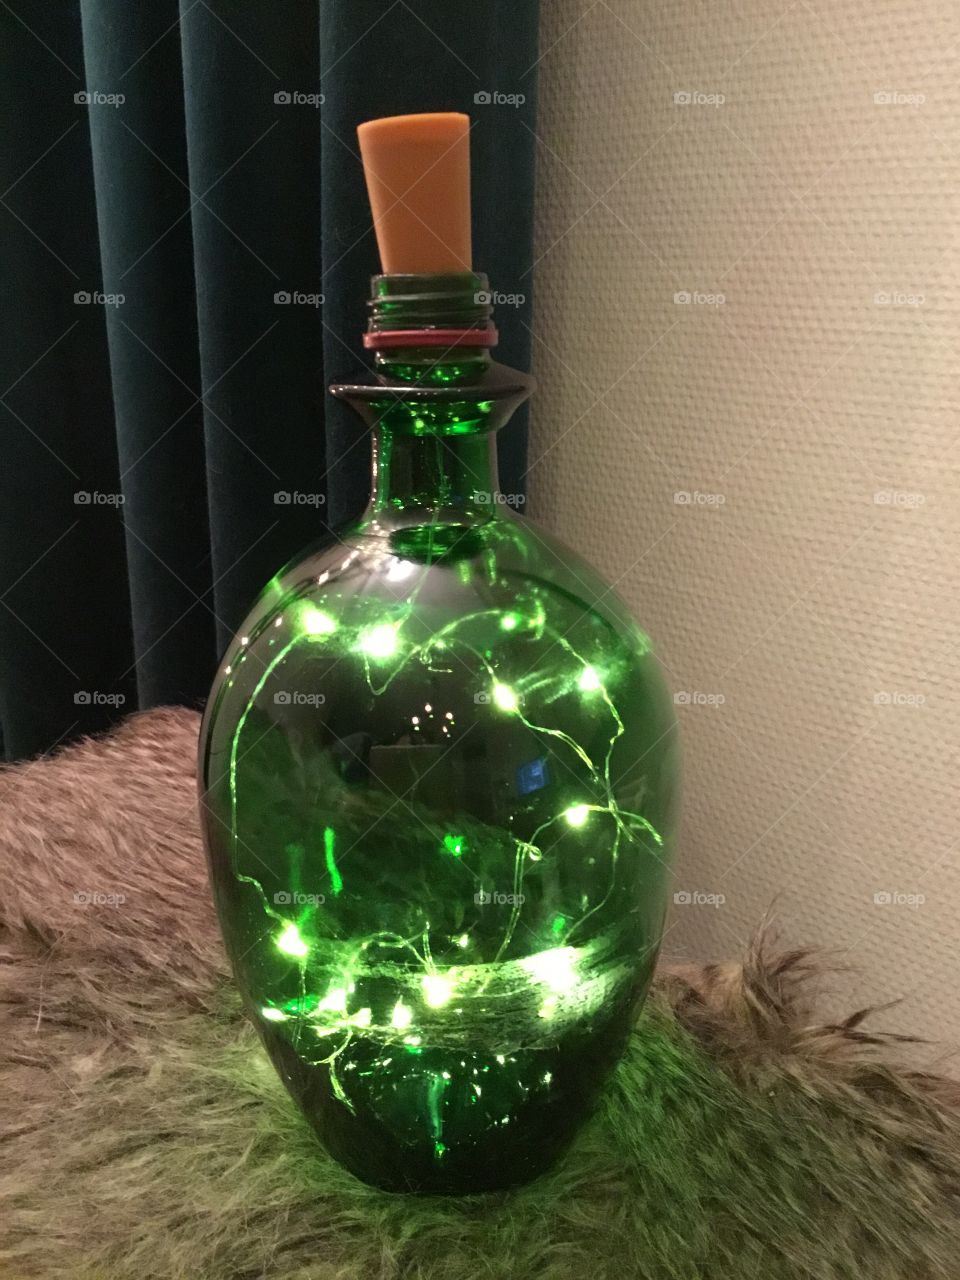 Bottle with lights

